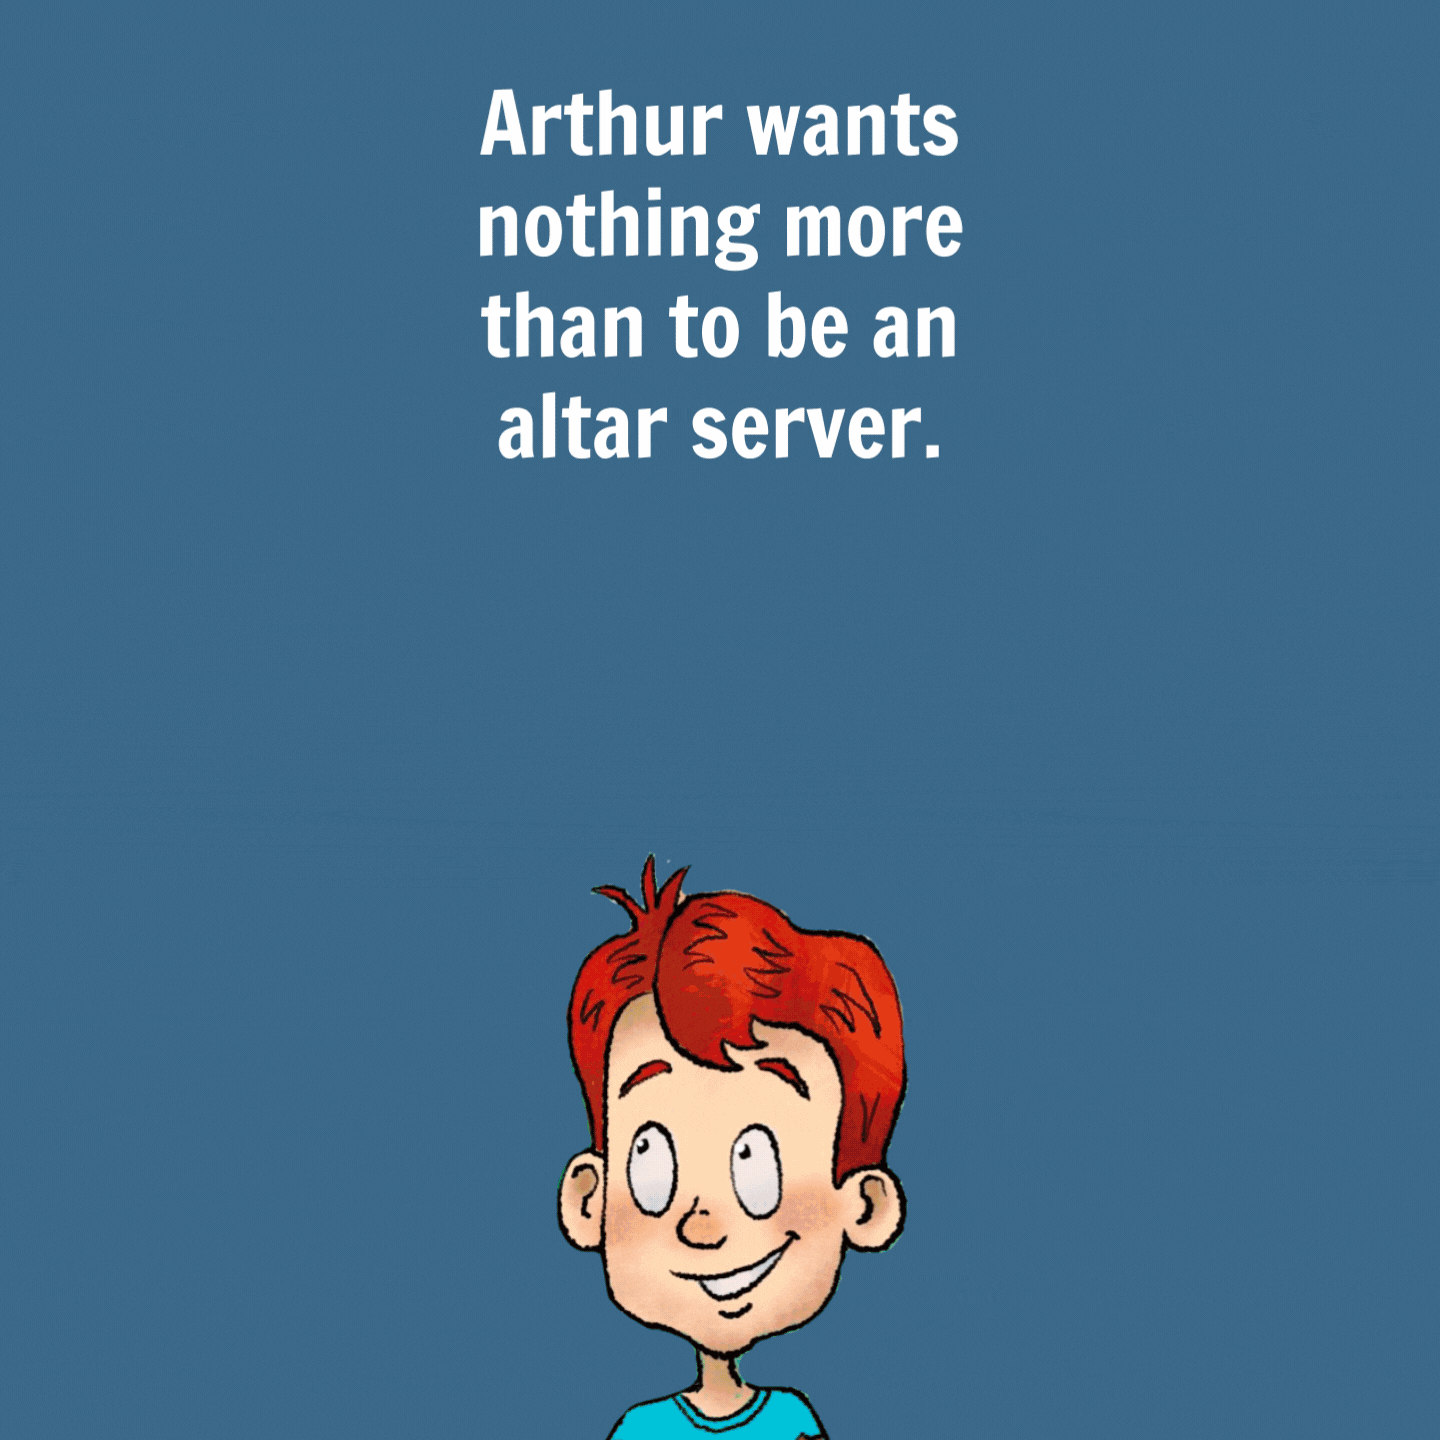 Get Arthur FREE when you subscribe to OSV Kids